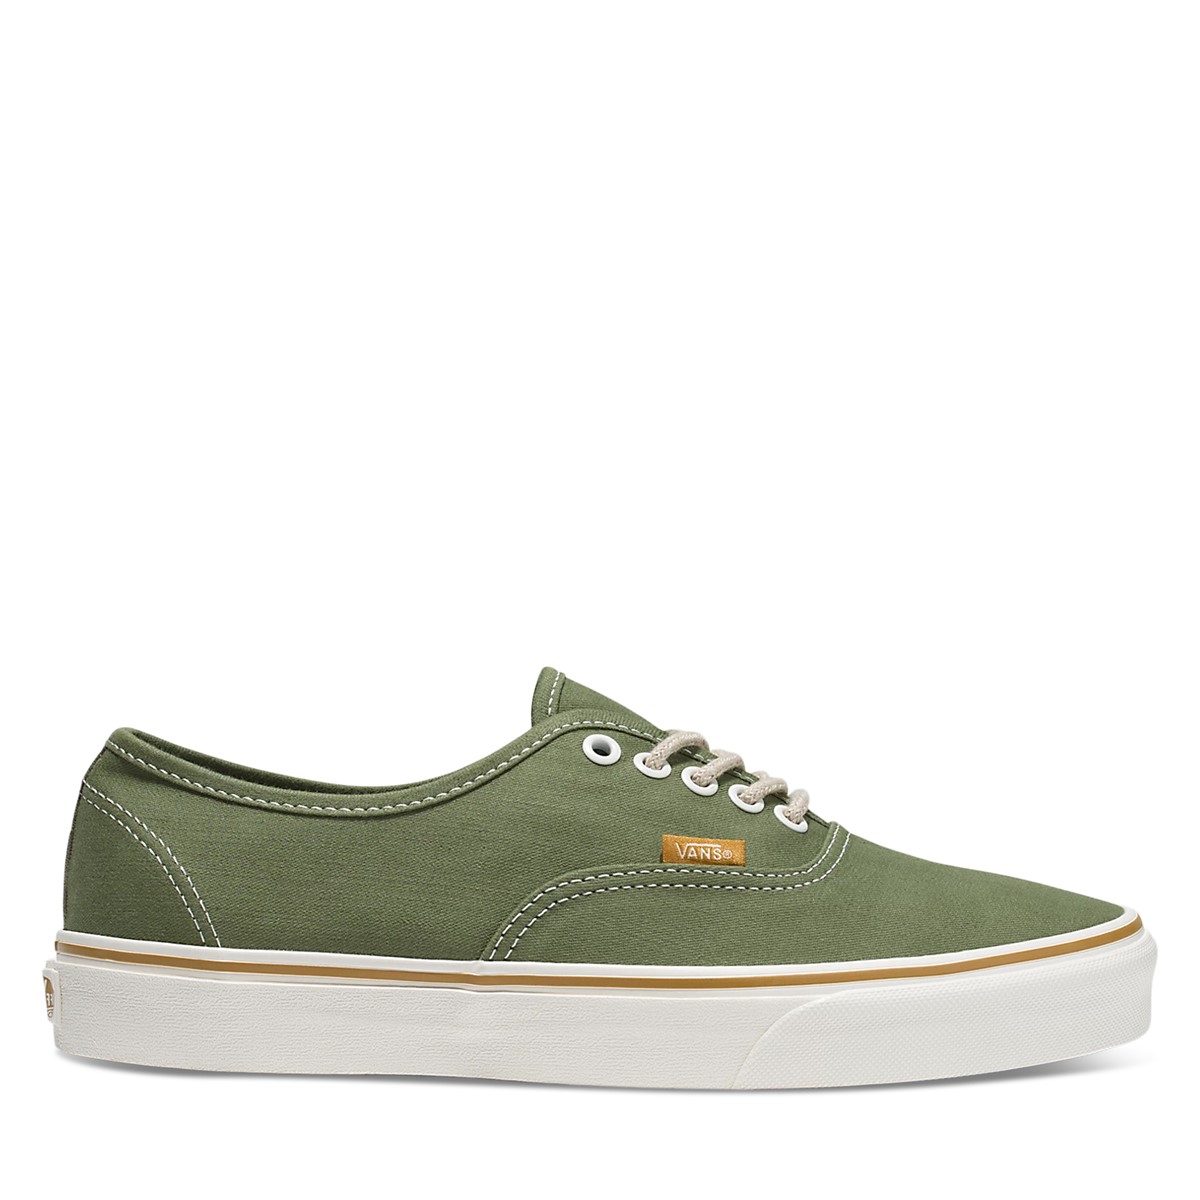 Men's Authentic Embroidered Check Sneakers in Loden Green